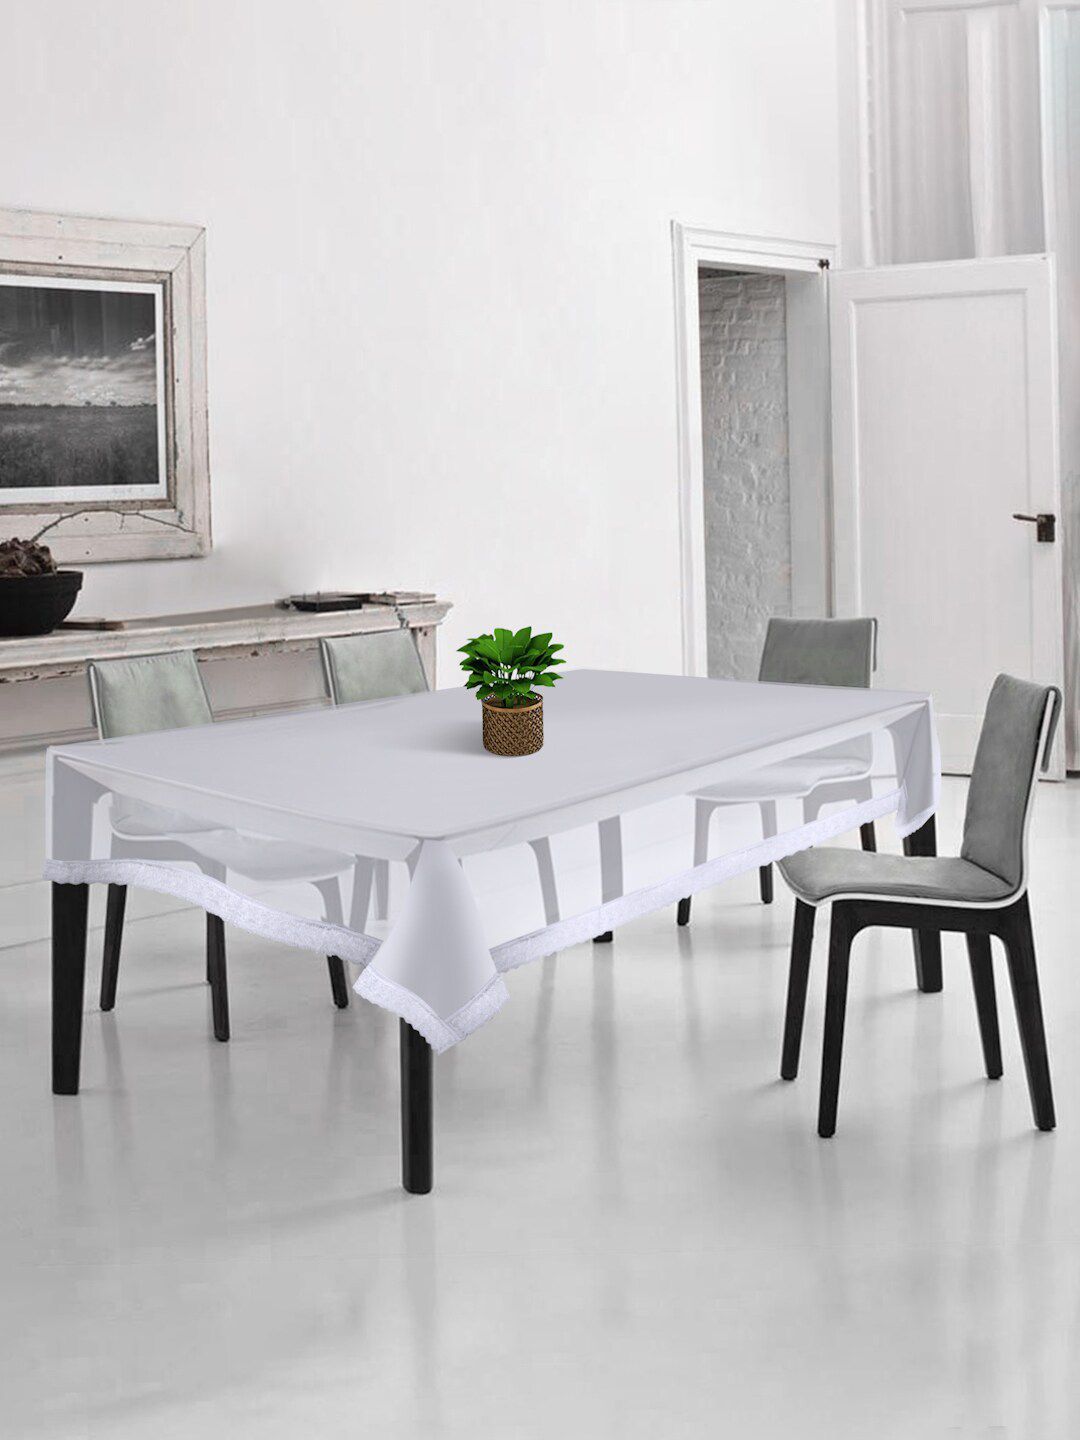 HOSTA HOMES Transparent PVC 4 Seater Table Cover Price in India